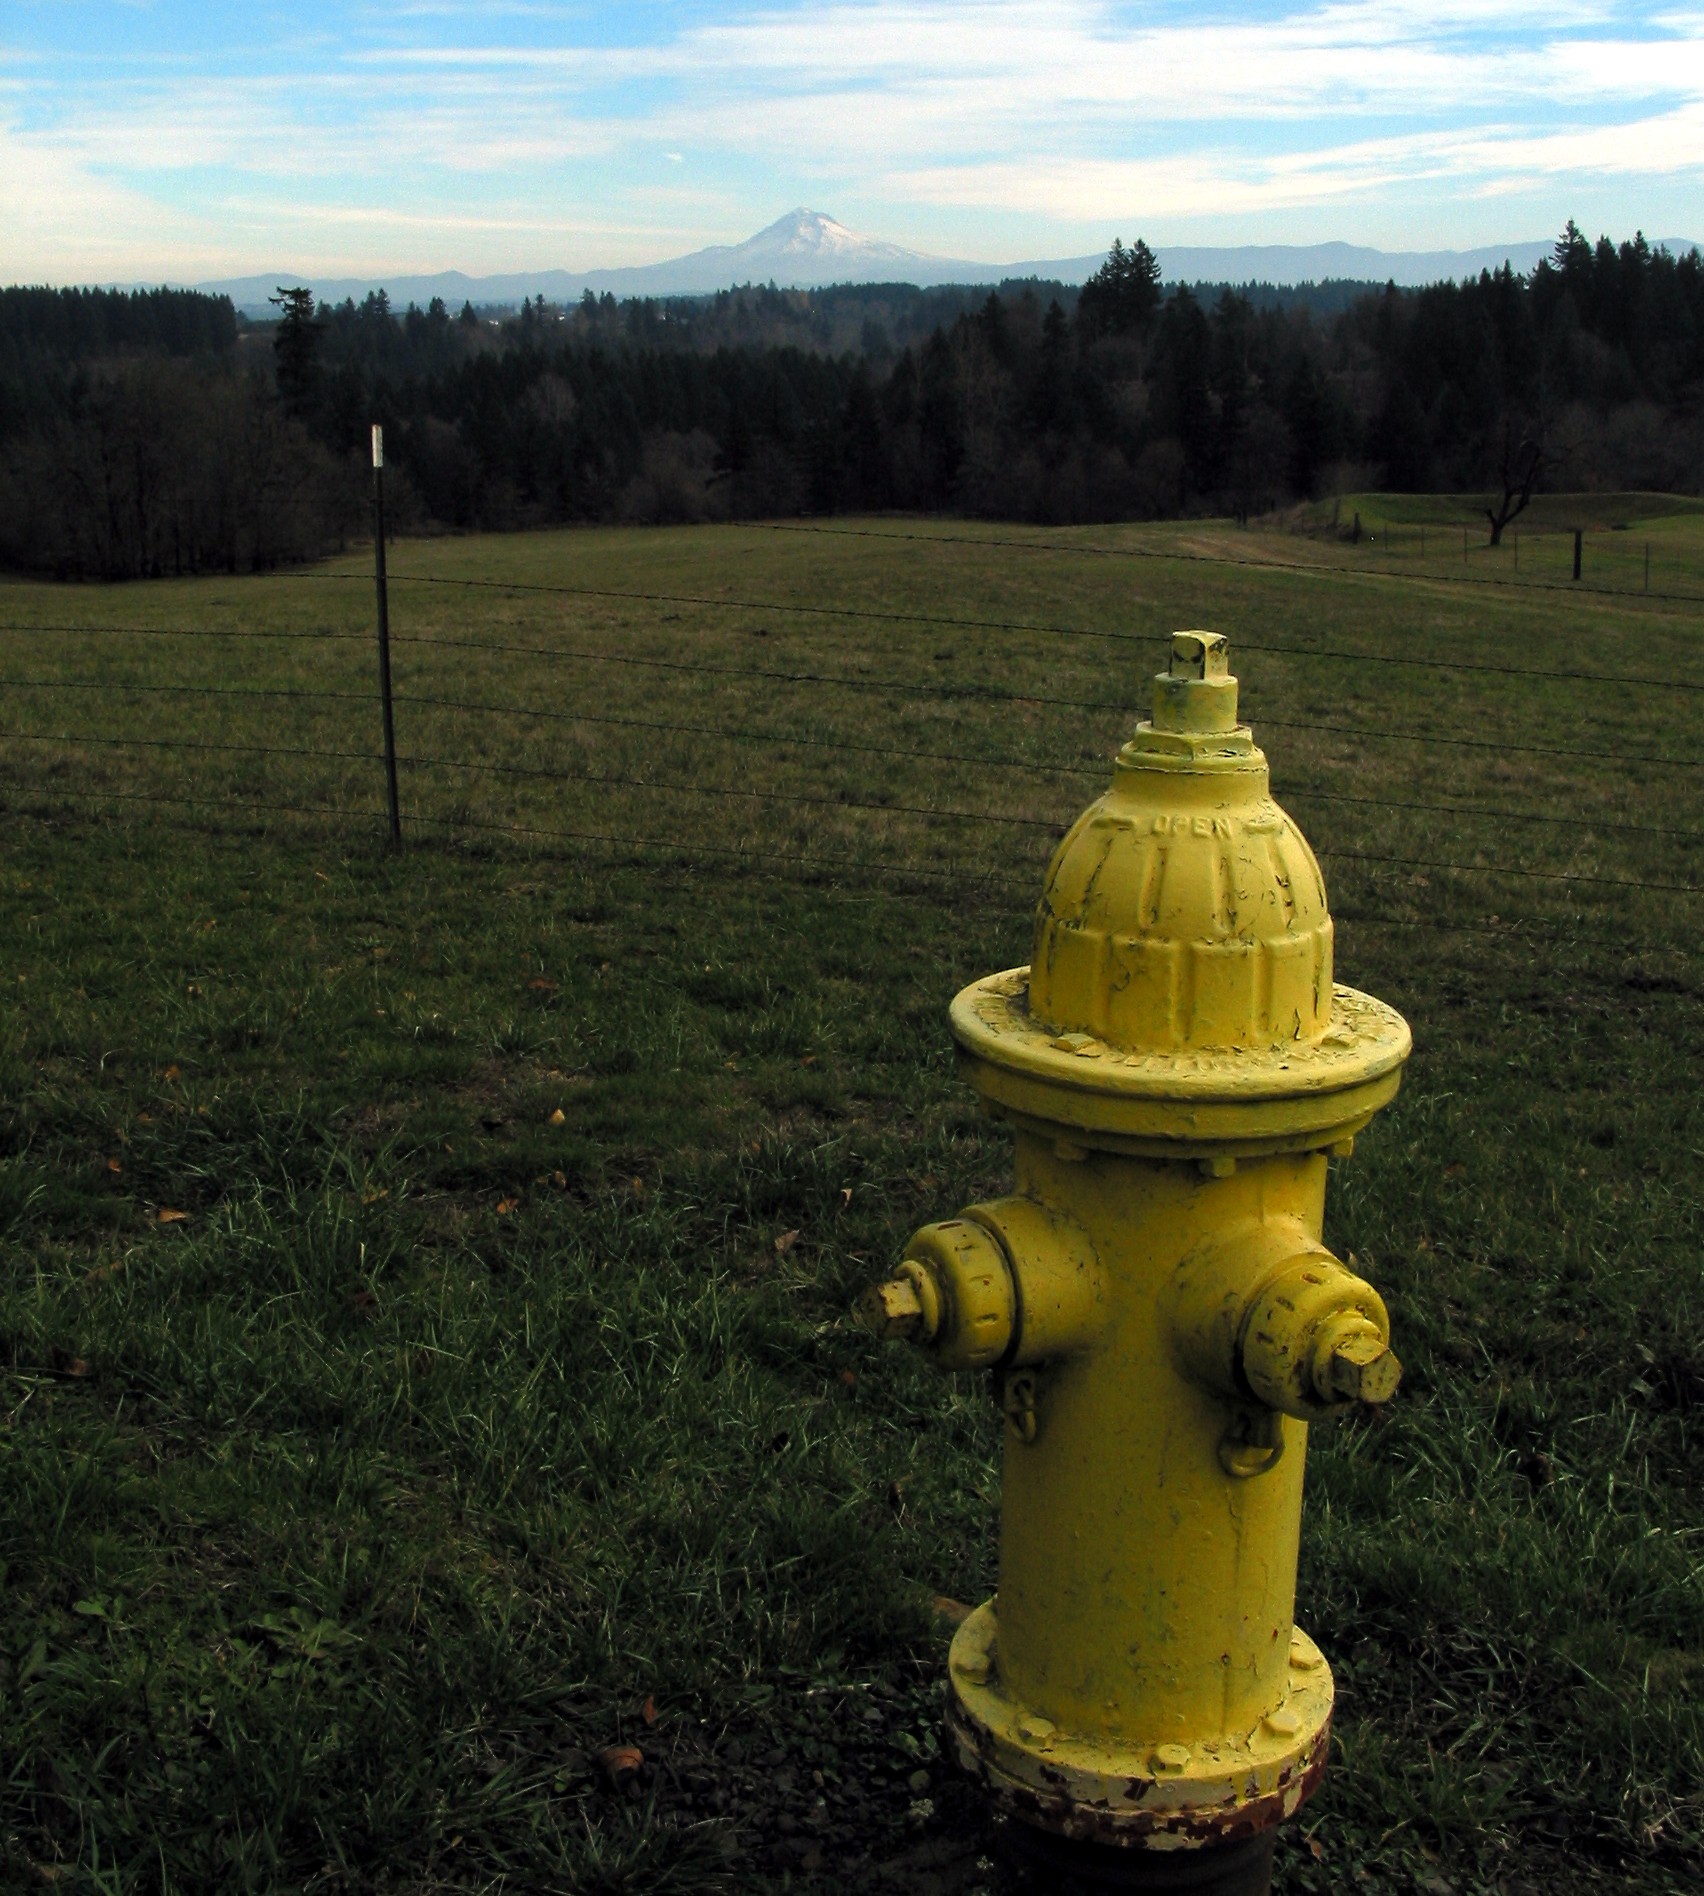 Hatton Road fire hydrant with Mt Hood 117